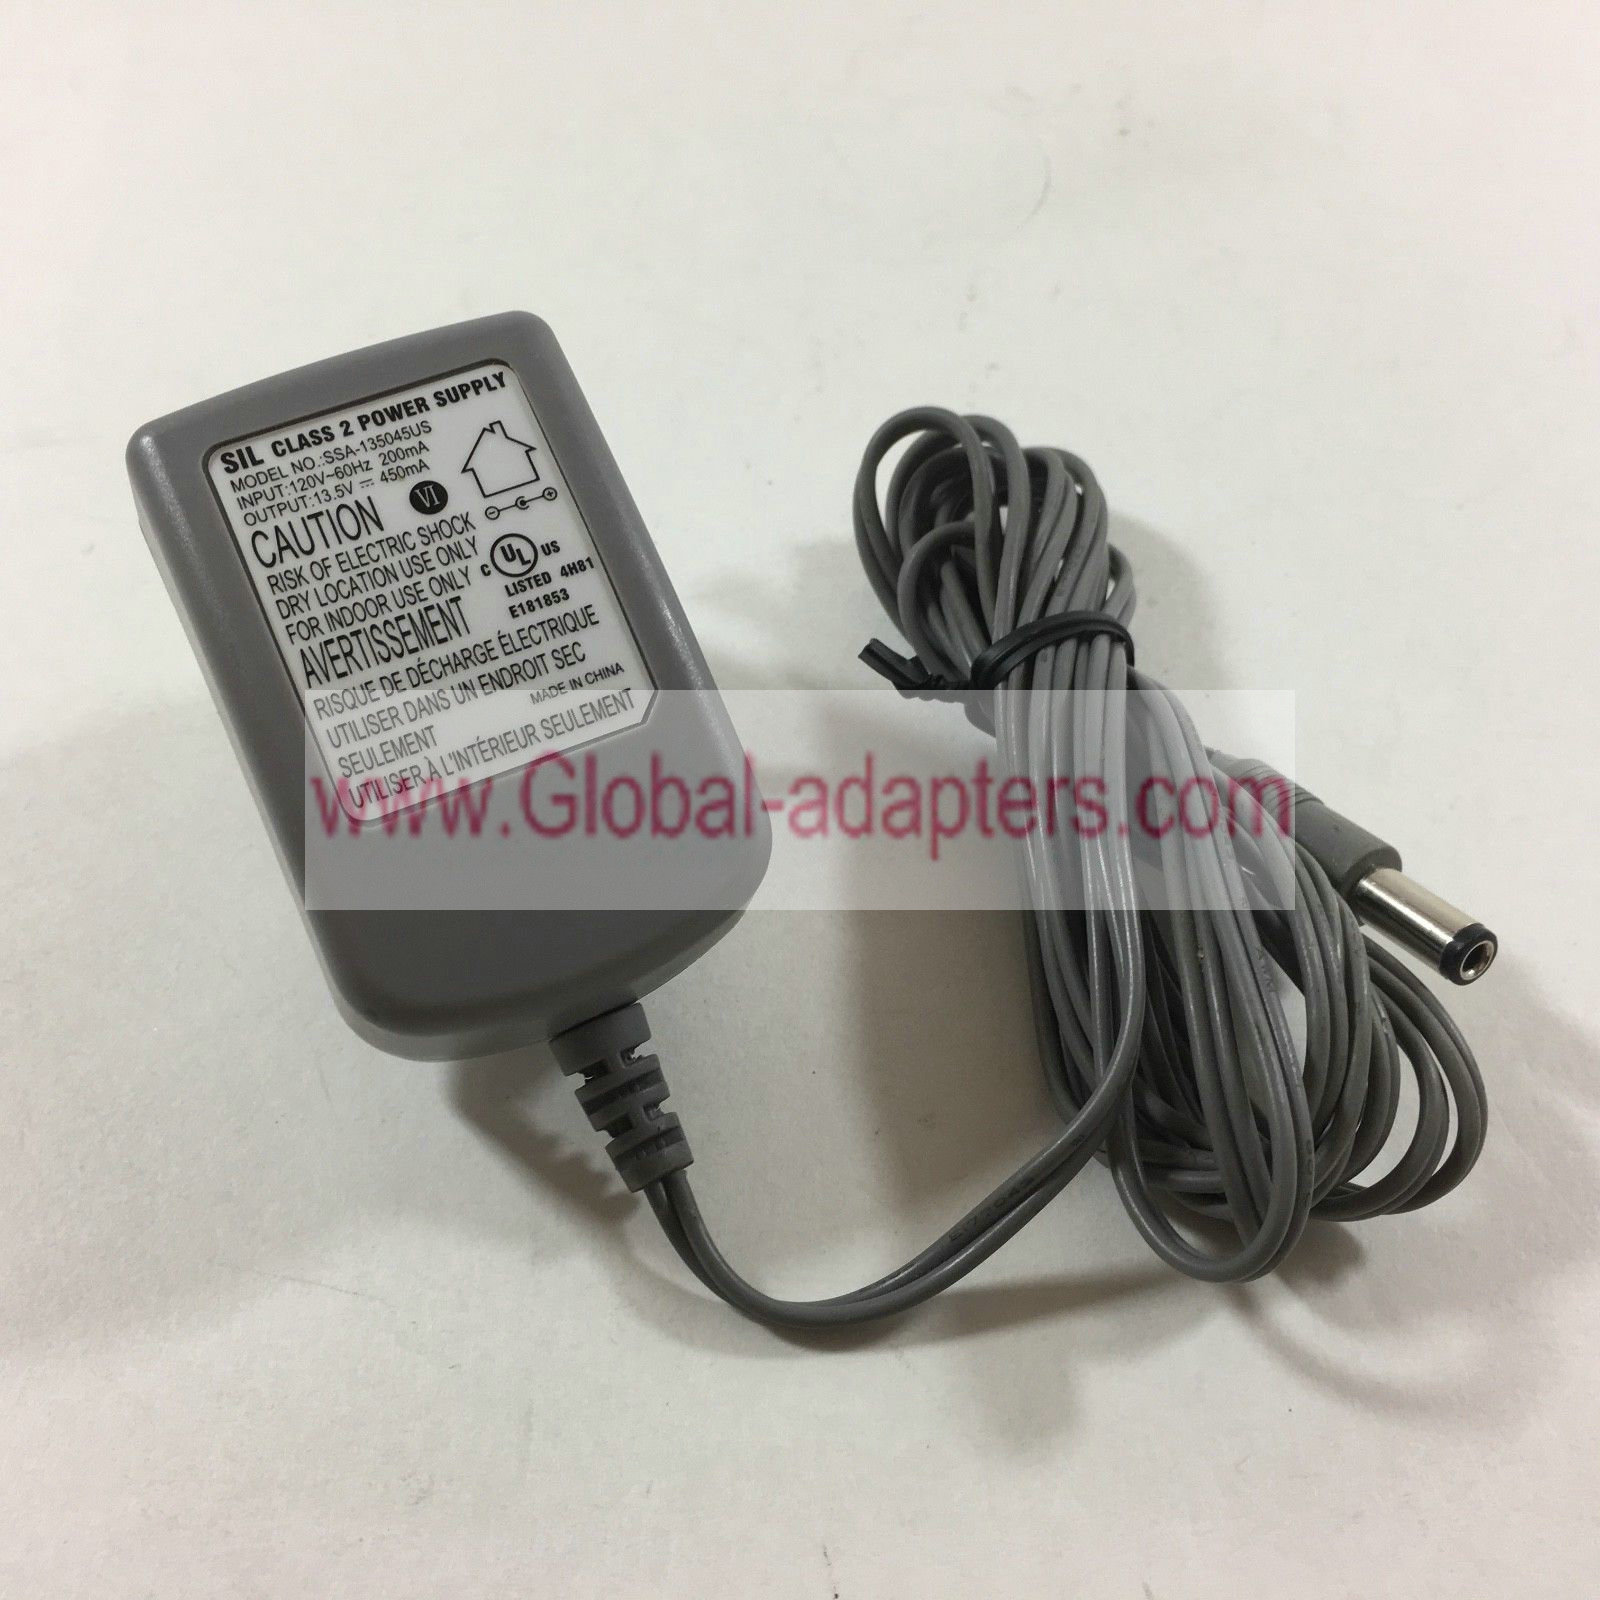 Brand New SIL SSA-135045US DC 13.5V DC 450mA CLASS 2 POWER SUPPLY FOR ELECTROLUX